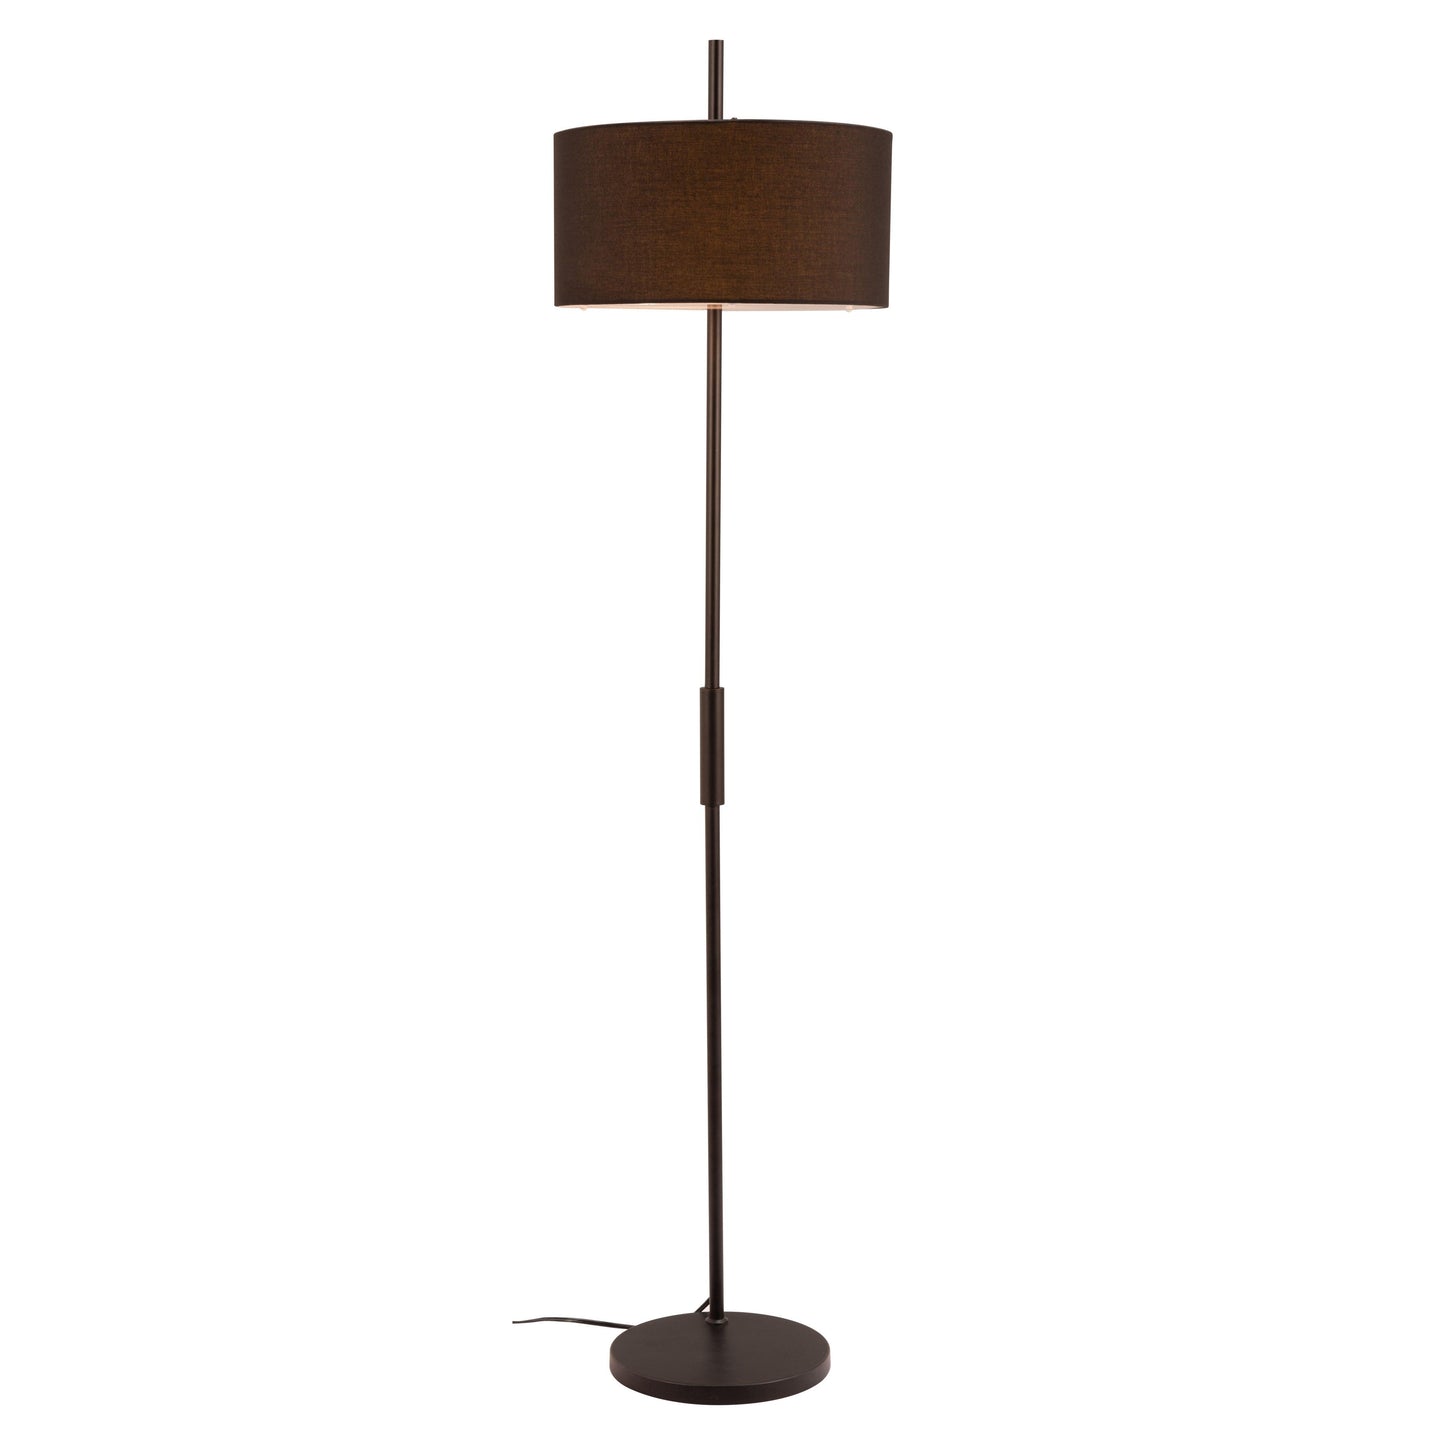 Lonte Floor Lamp Black - Sideboards and Things Brand_Zuo Modern, Color_Black, Depth_10-20, Finish_Powder Coated, Height_60-70, Materials_Metal, Metal Type_Steel, Product Type_Floor Lamp, Upholstery Type_Fabric Blend, Upholstery Type_Polyester, Width_10-20